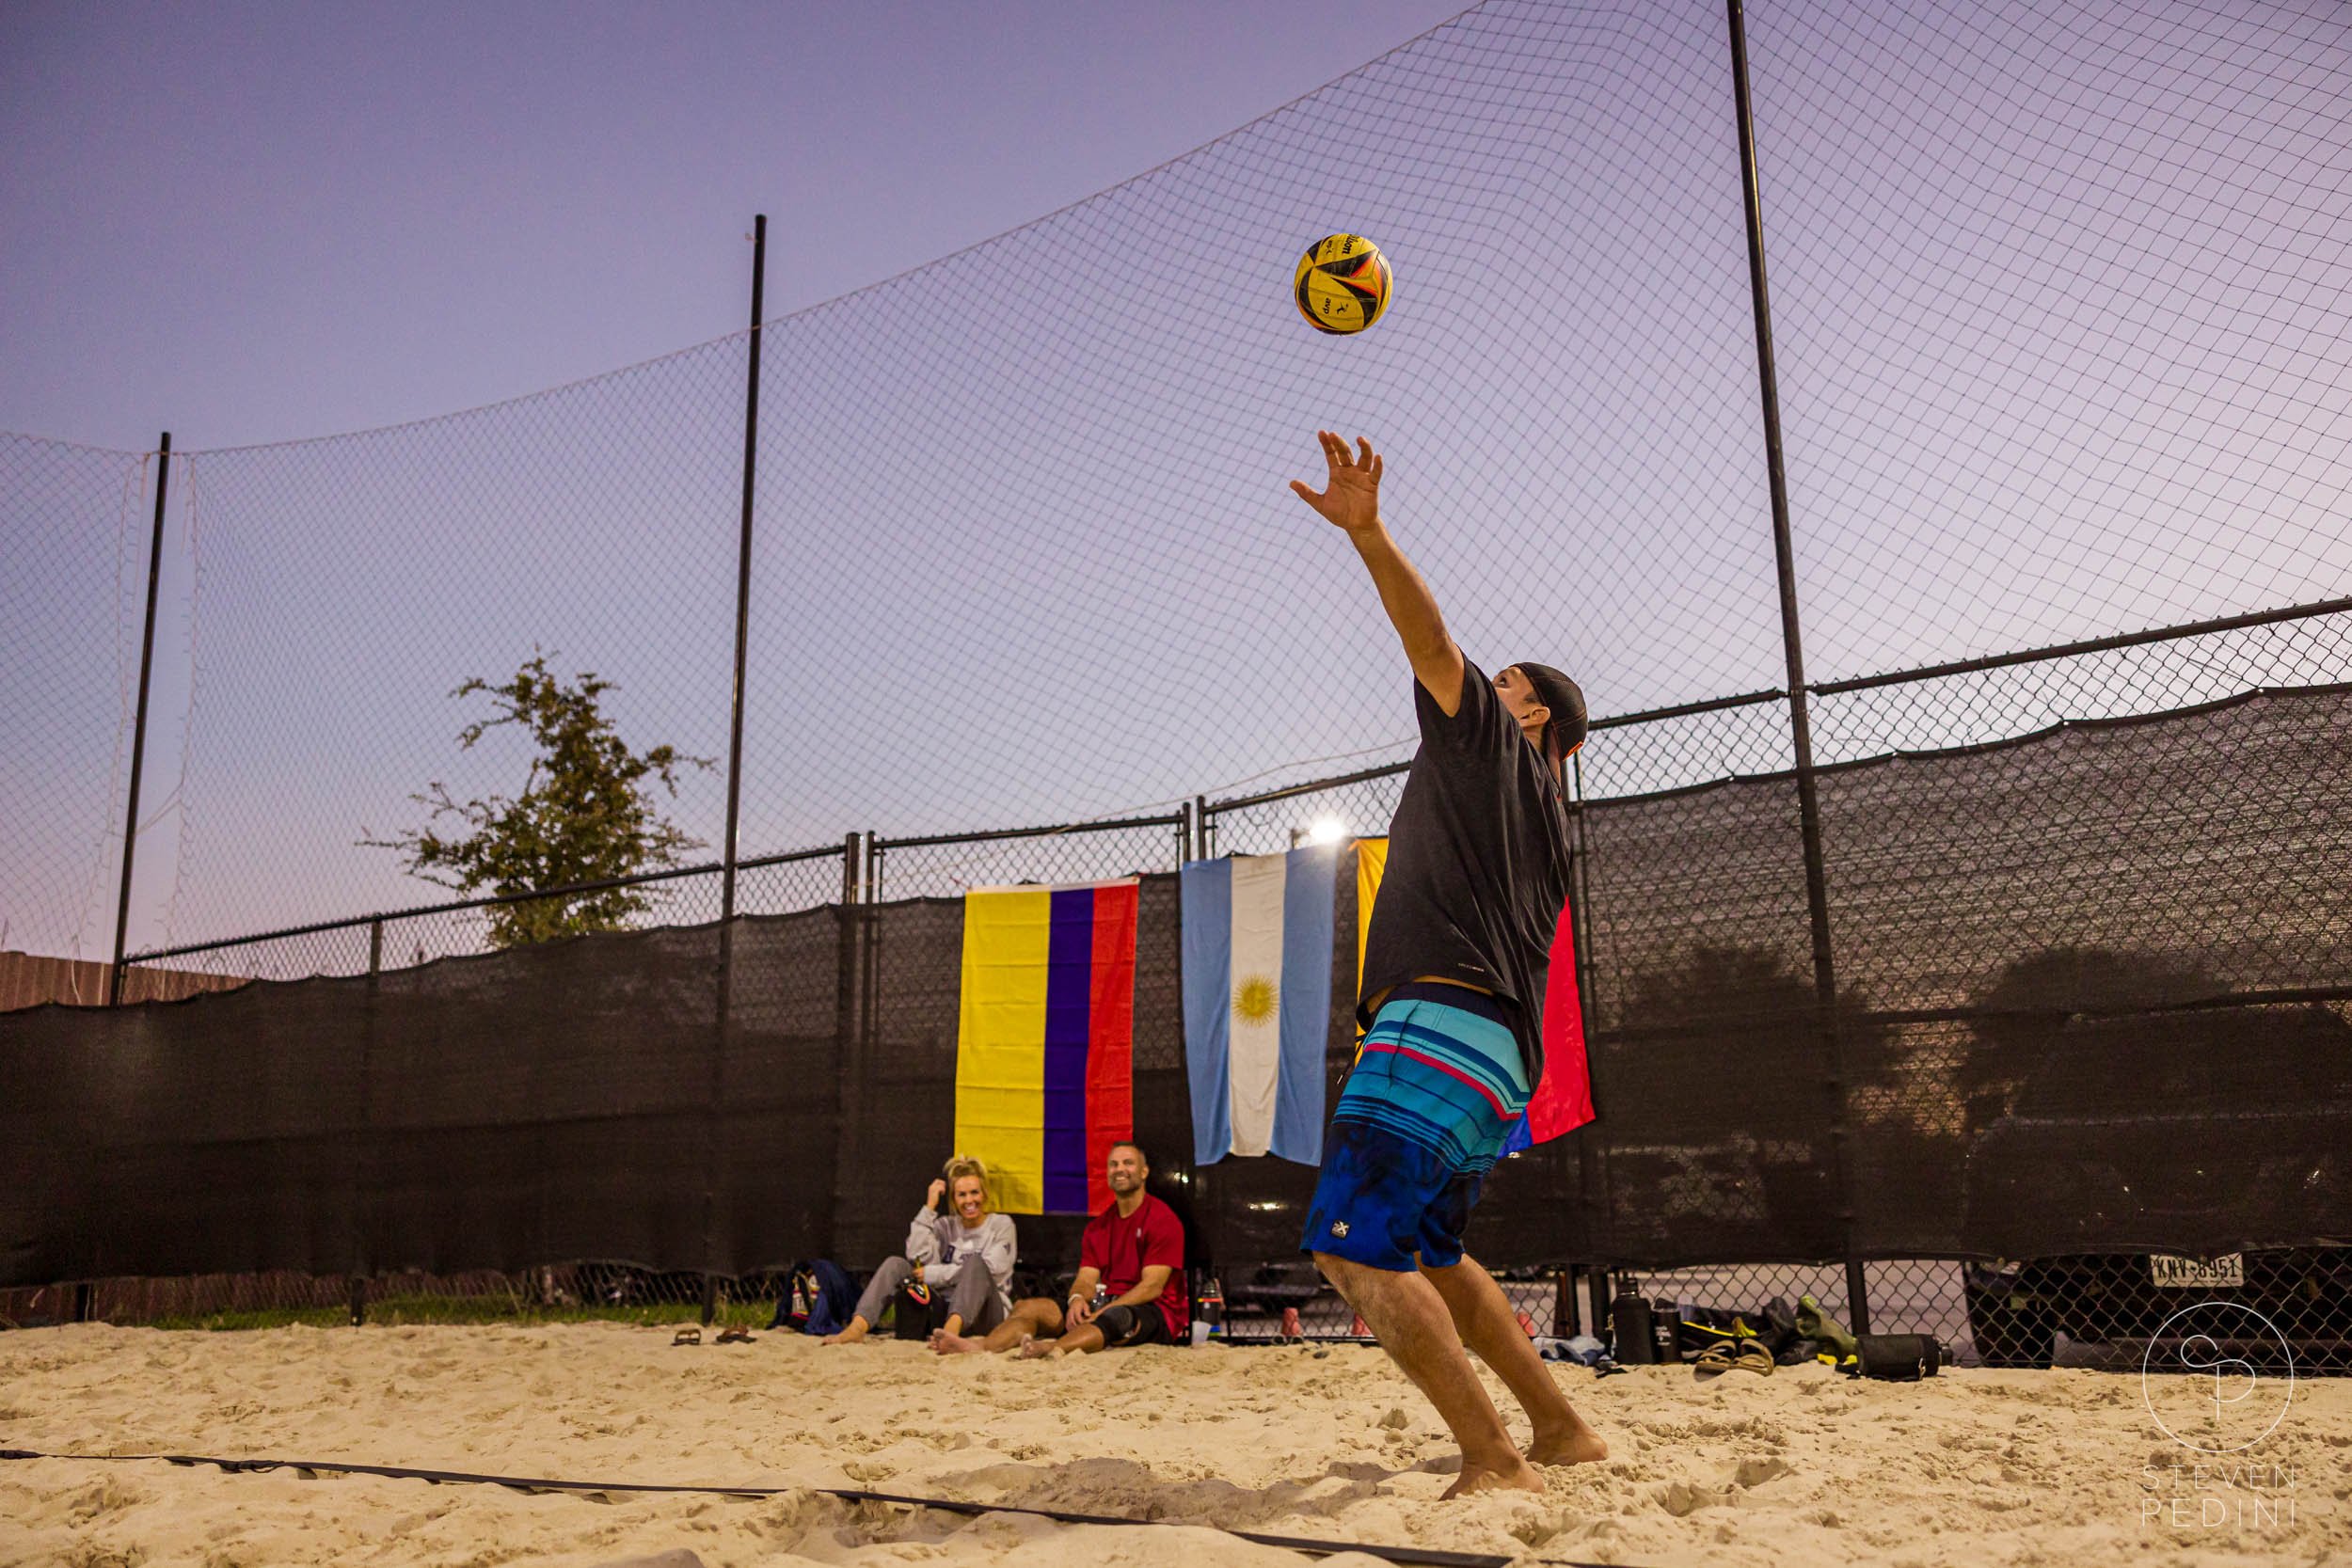 Steven Pedini Photography - Bumpy Pickle - Sand Volleyball - Houston TX - World Cup of Volleyball - 00295.jpg